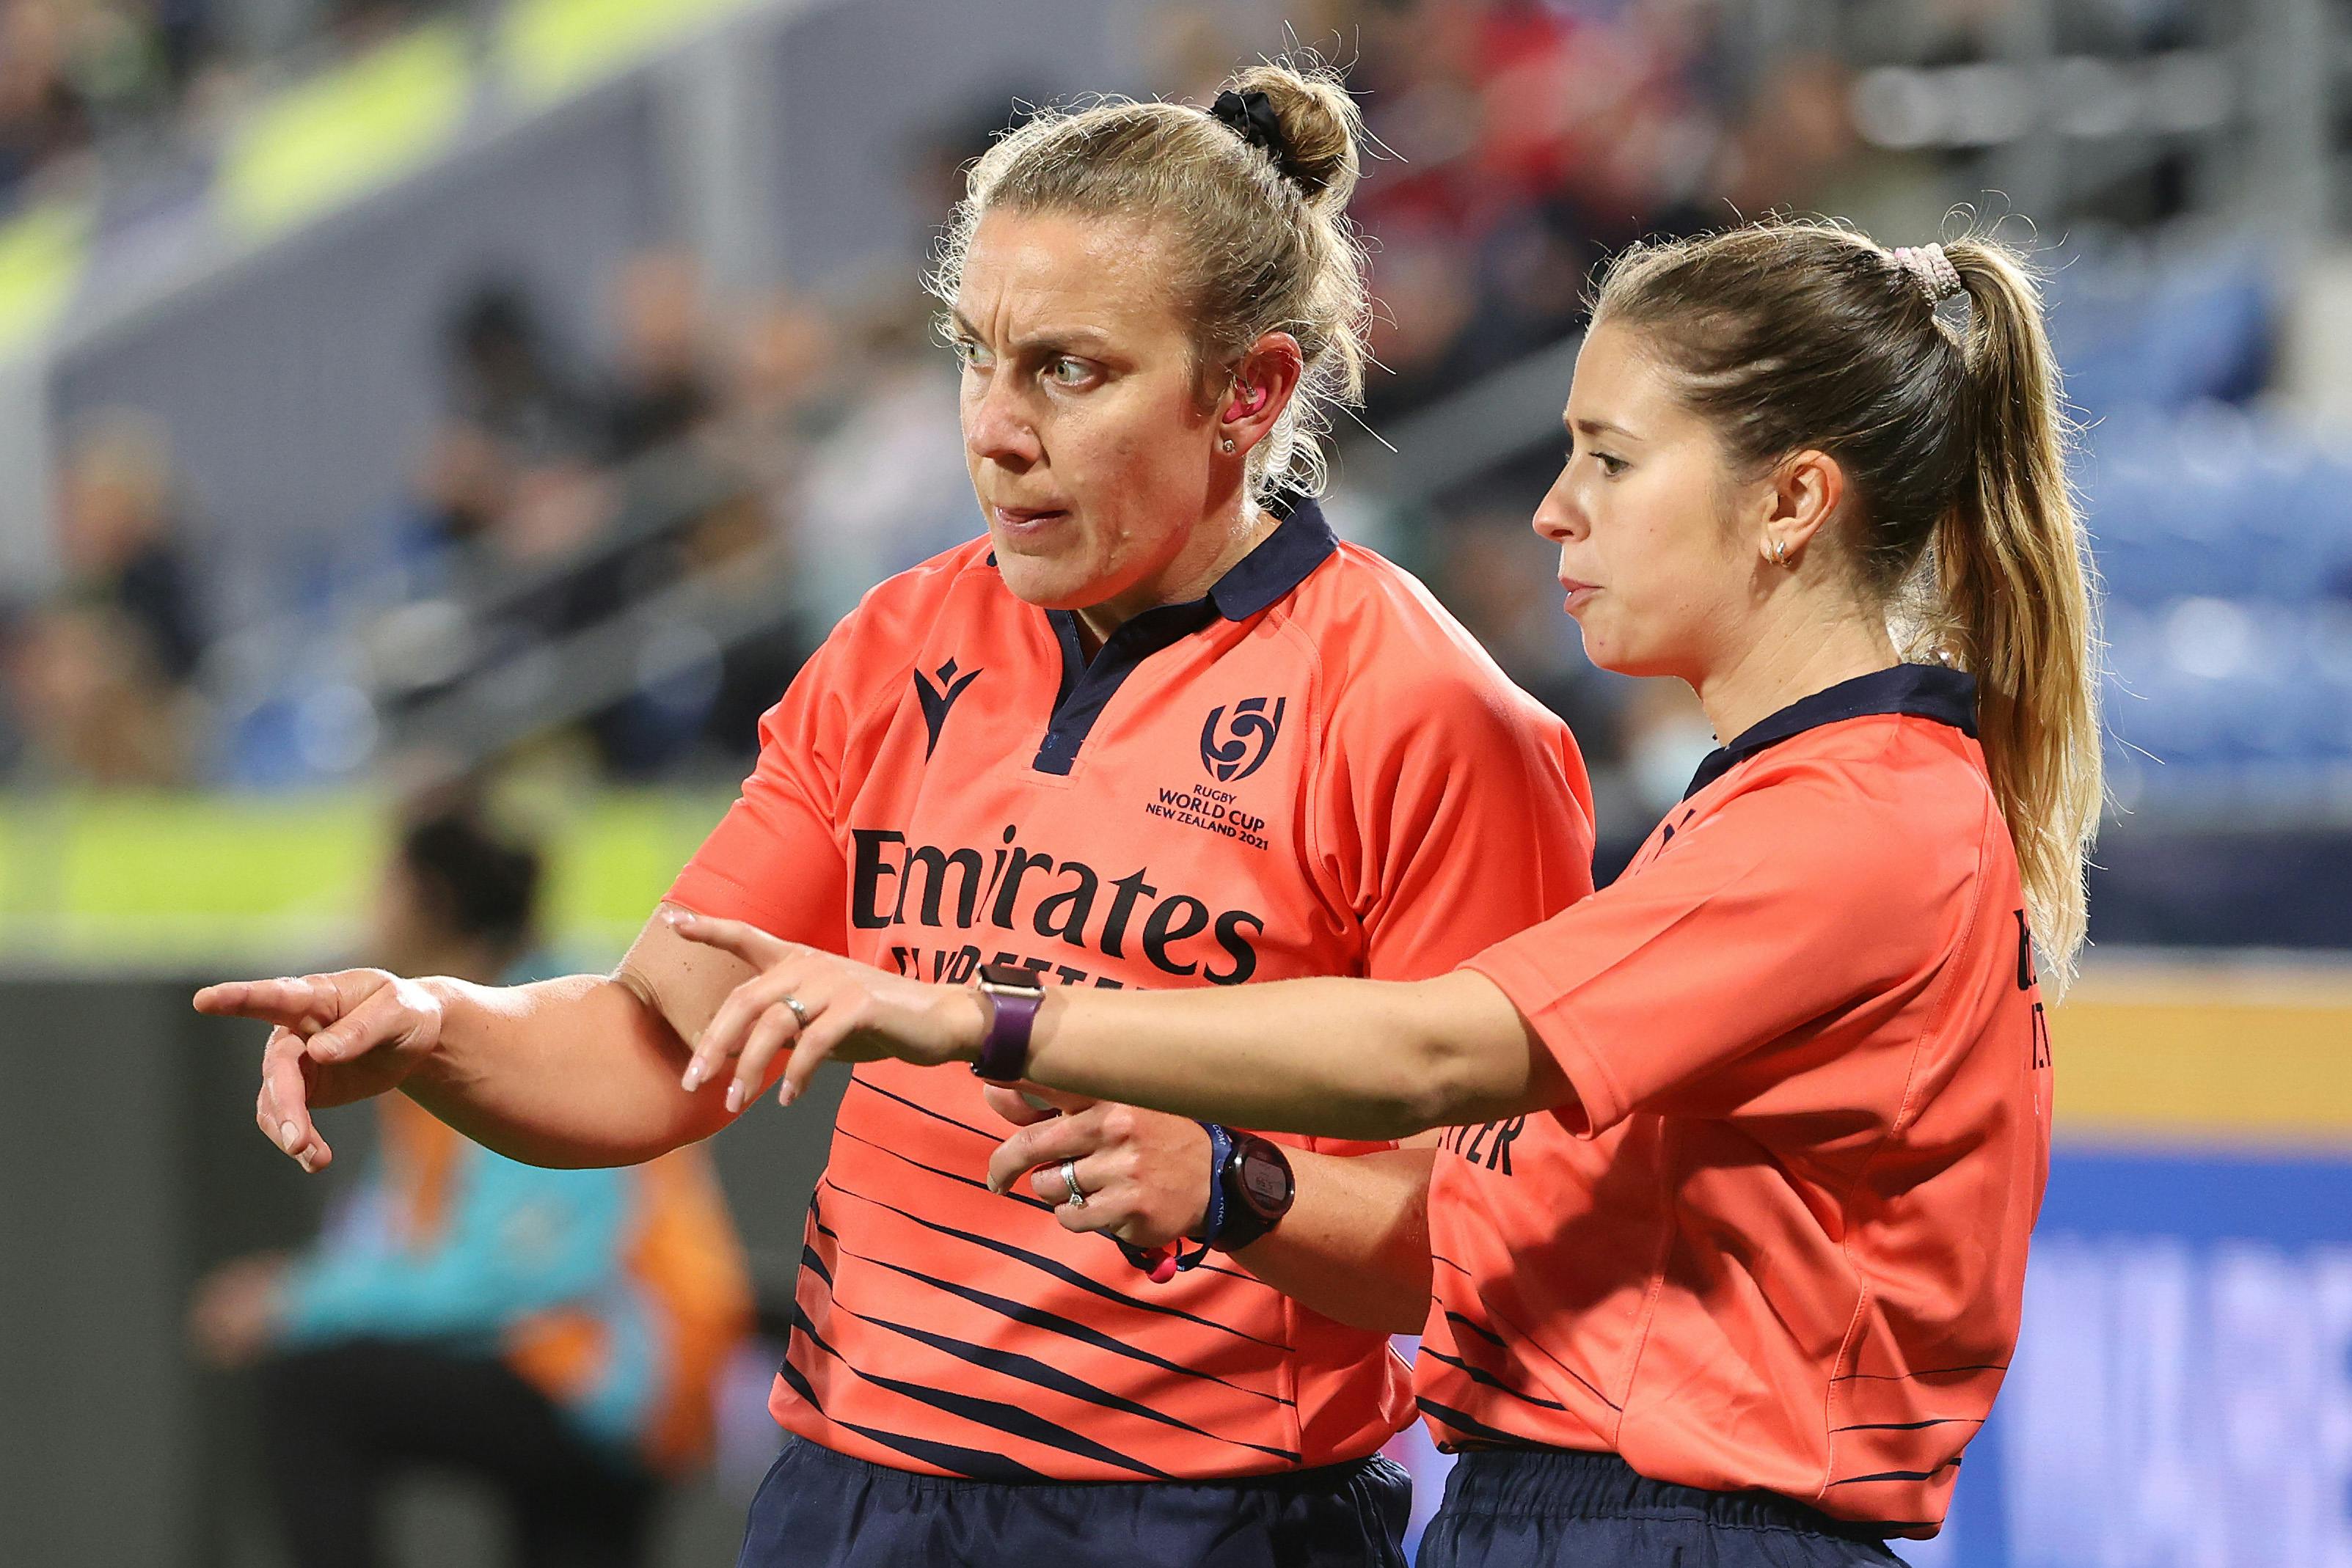 Amber McLachlan has been appointed to the Women's Six Nations opener. Photo: Getty Images